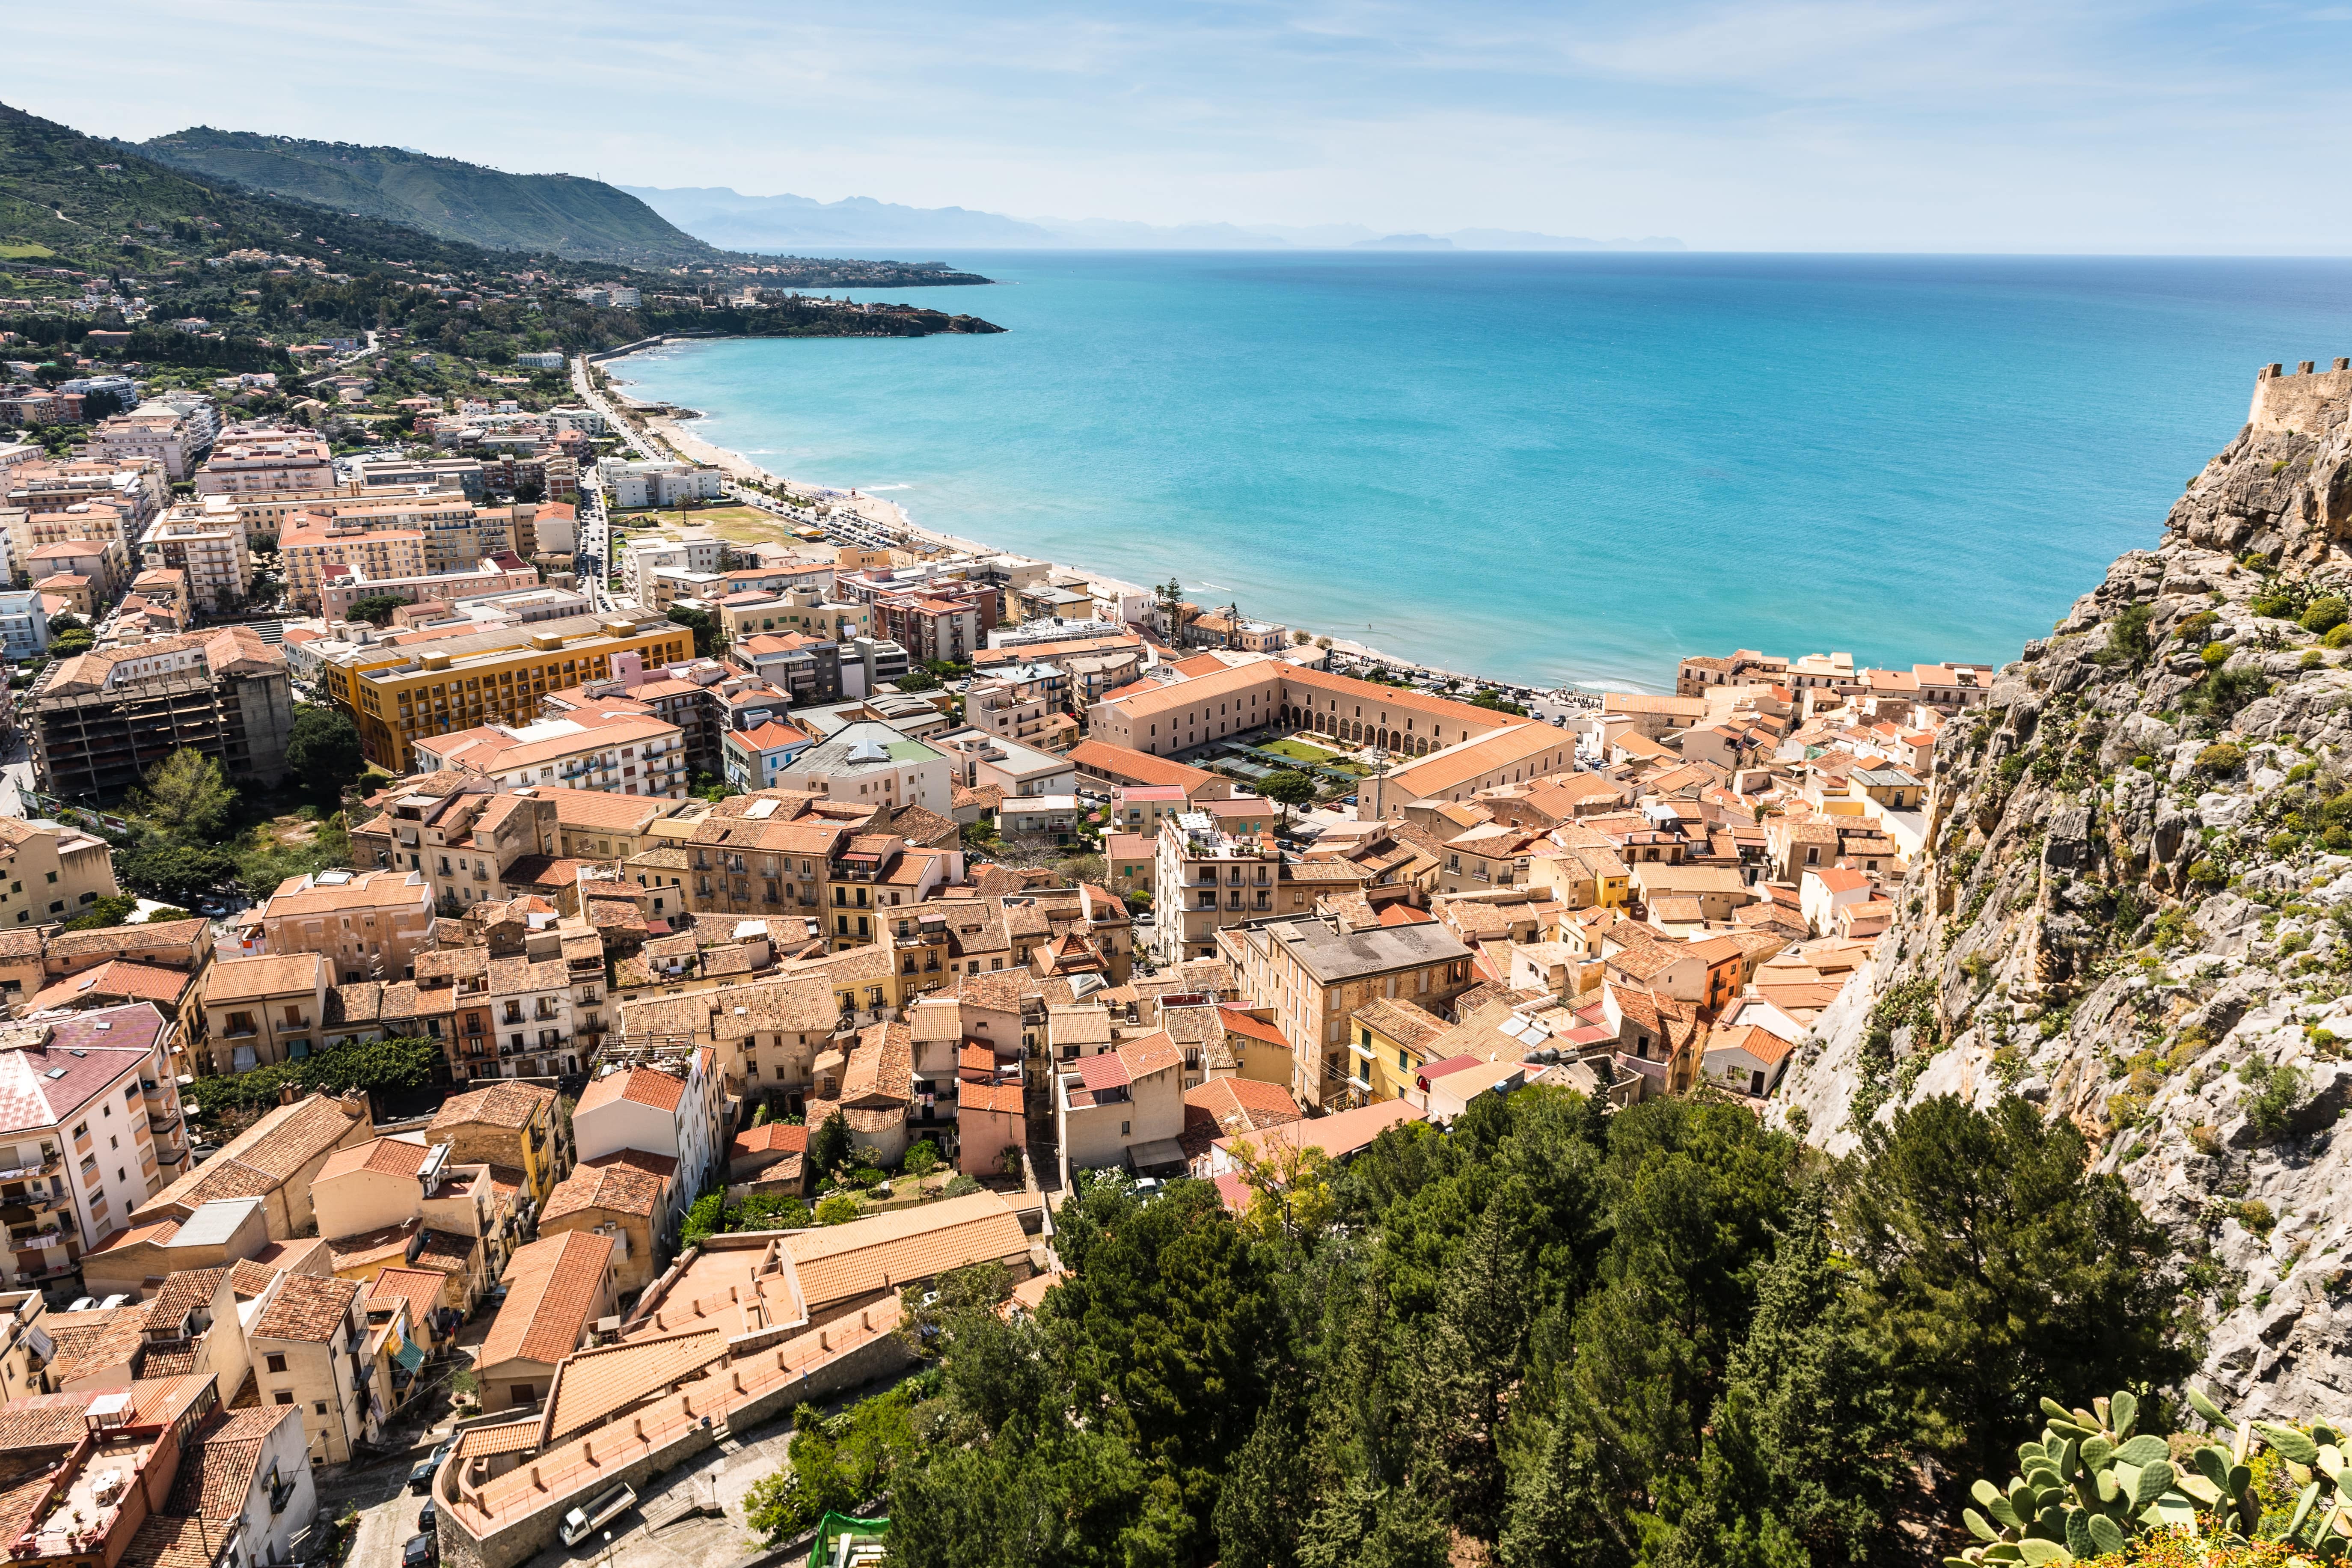 Stock image - Looking down on the city bay of Cefalù, Sicily, Italy - Photo by Jacek Dylag on Unsplash